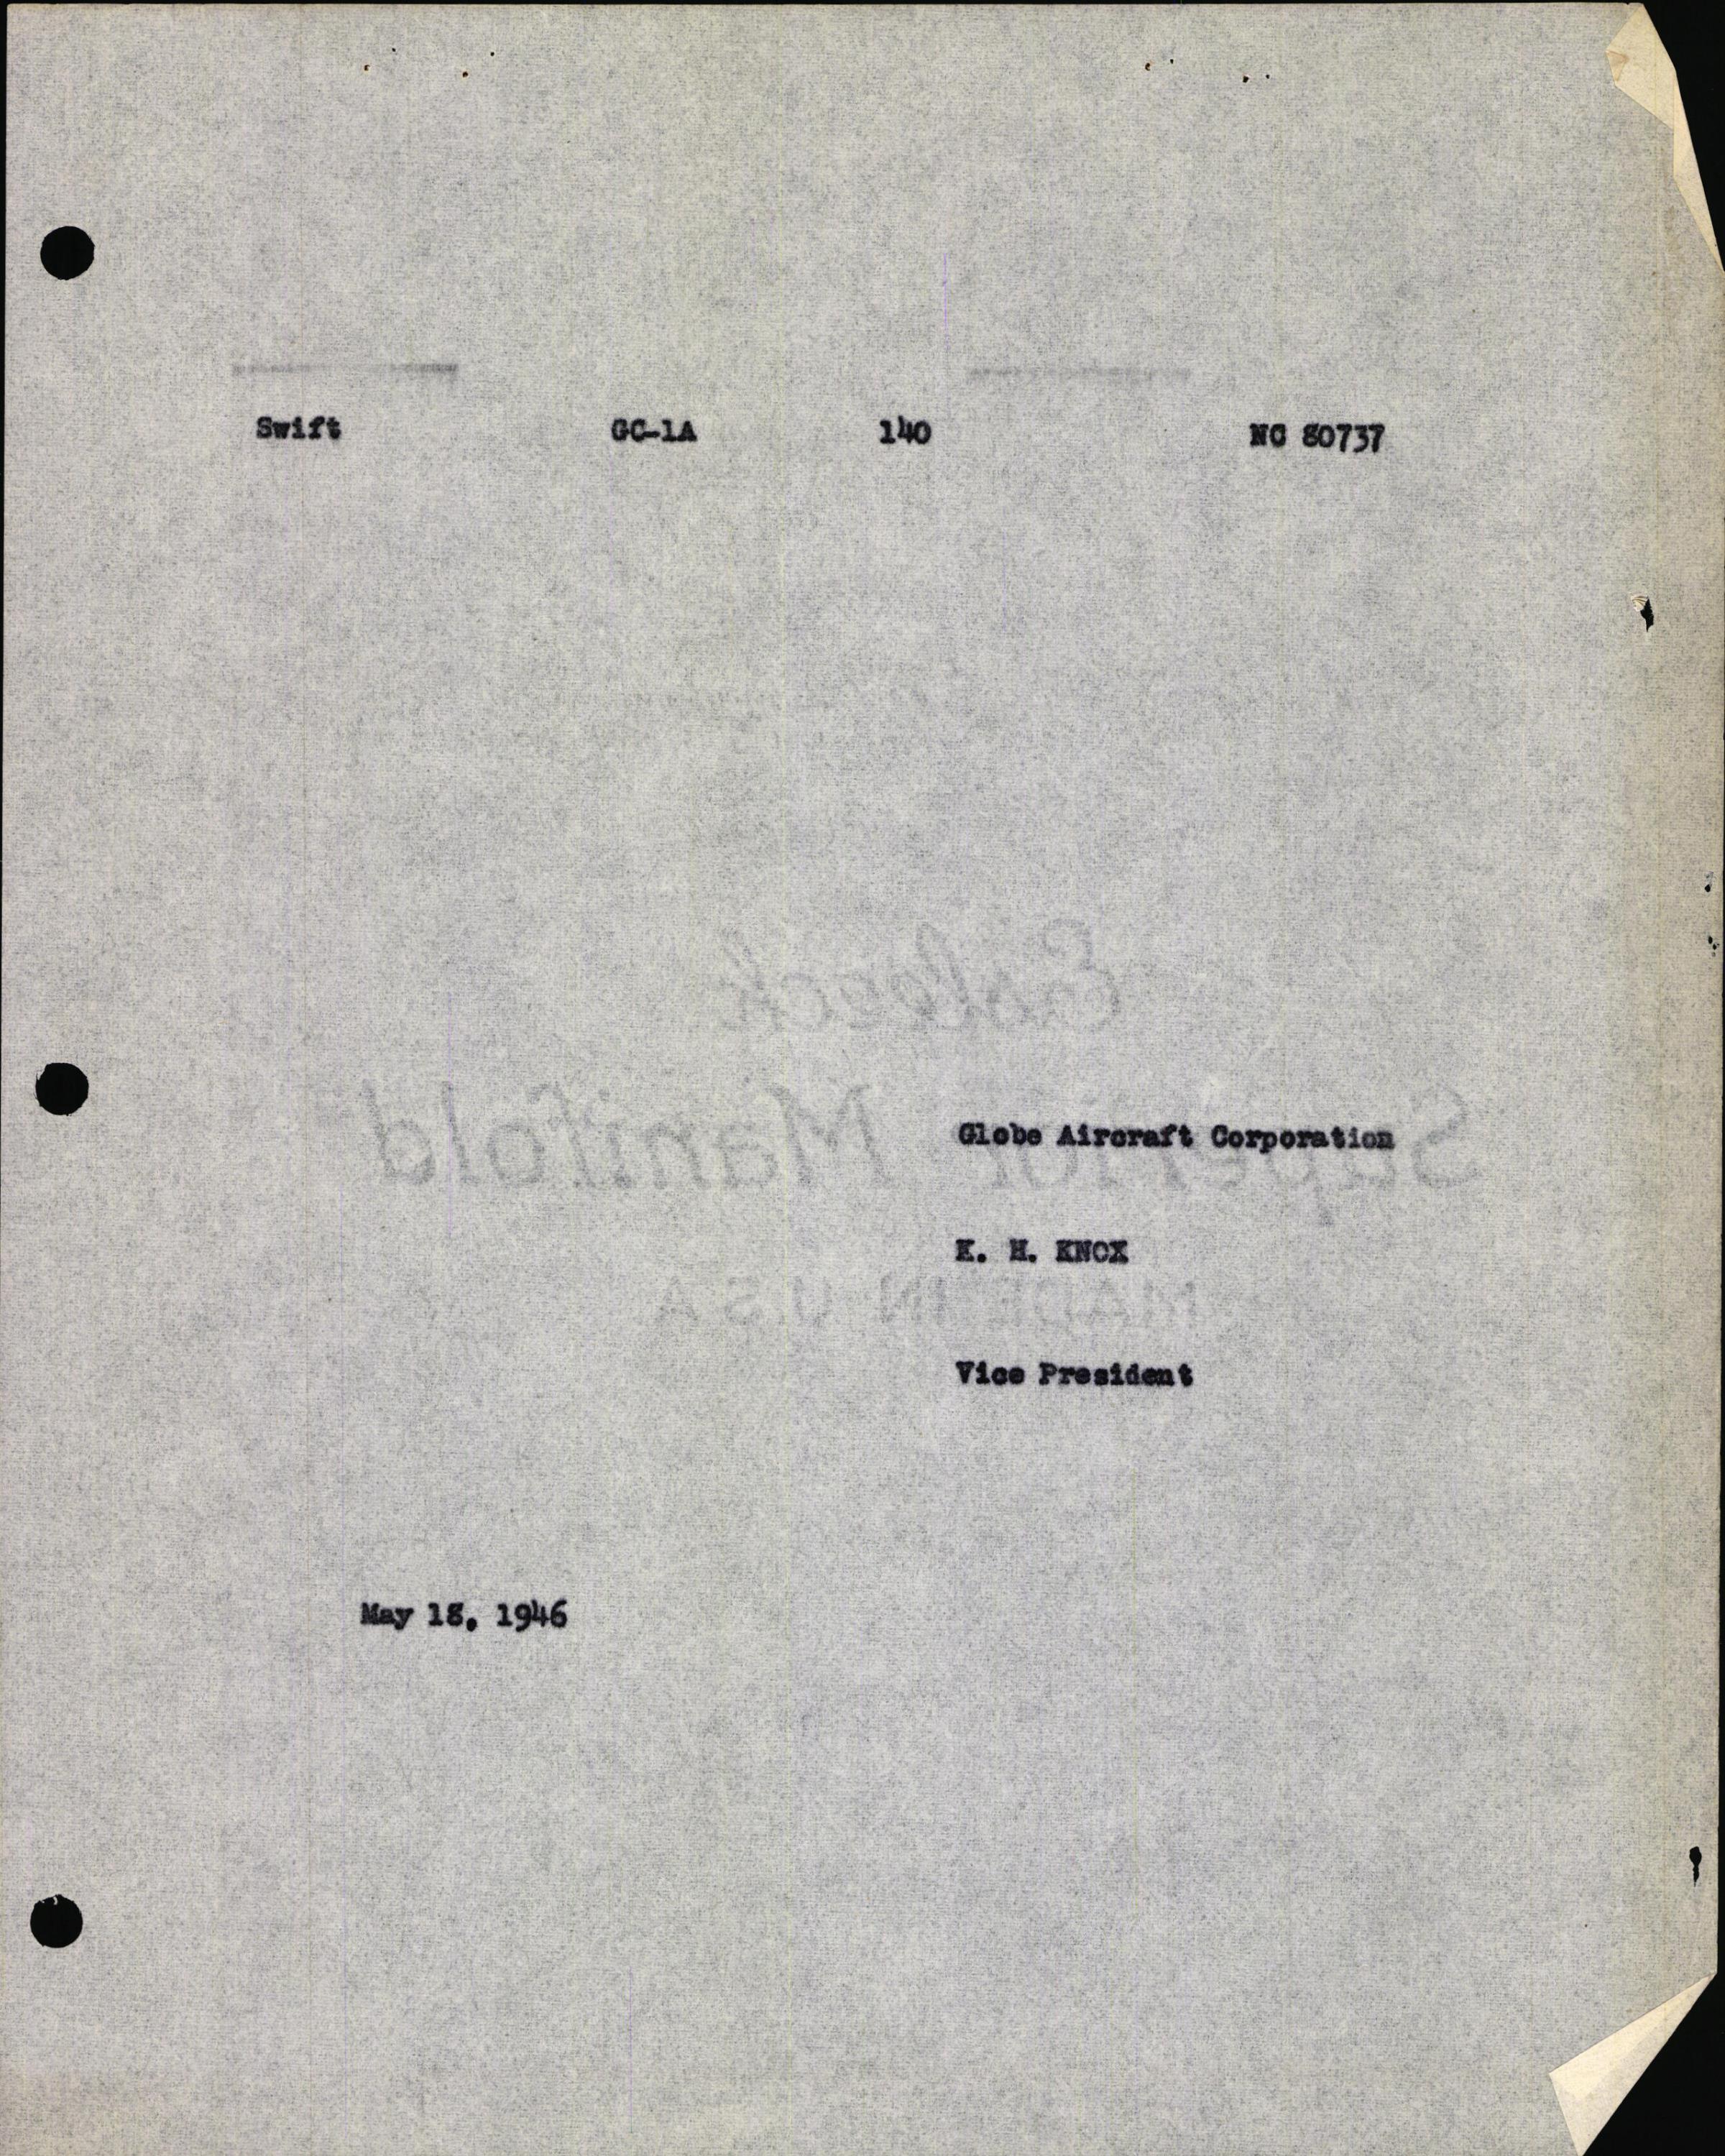 Sample page 7 from AirCorps Library document: Technical Information for Serial Number 140